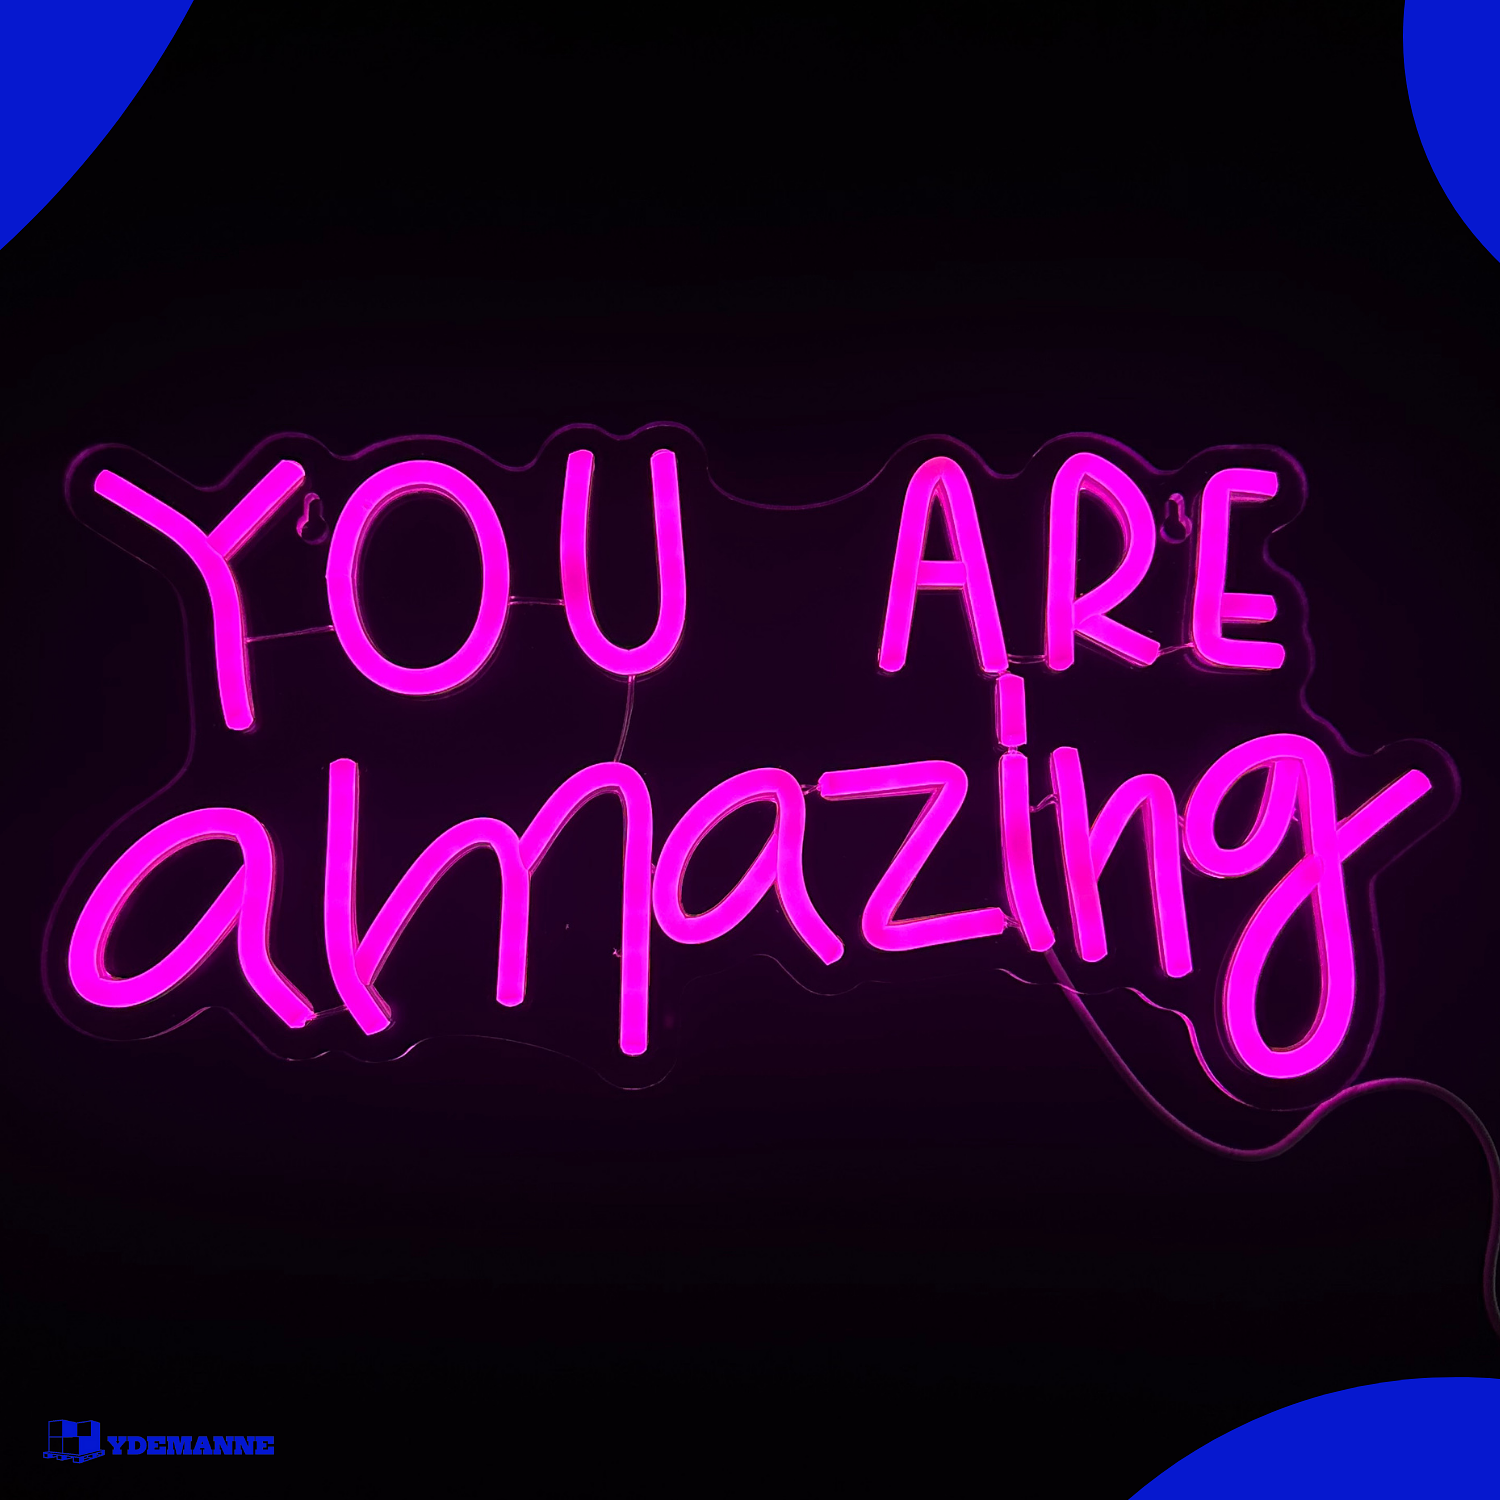 Neon Lamp - You Are Amazing Roze - Incl. Ophanghaakjes - Neon Sign - 20 x 40 cm